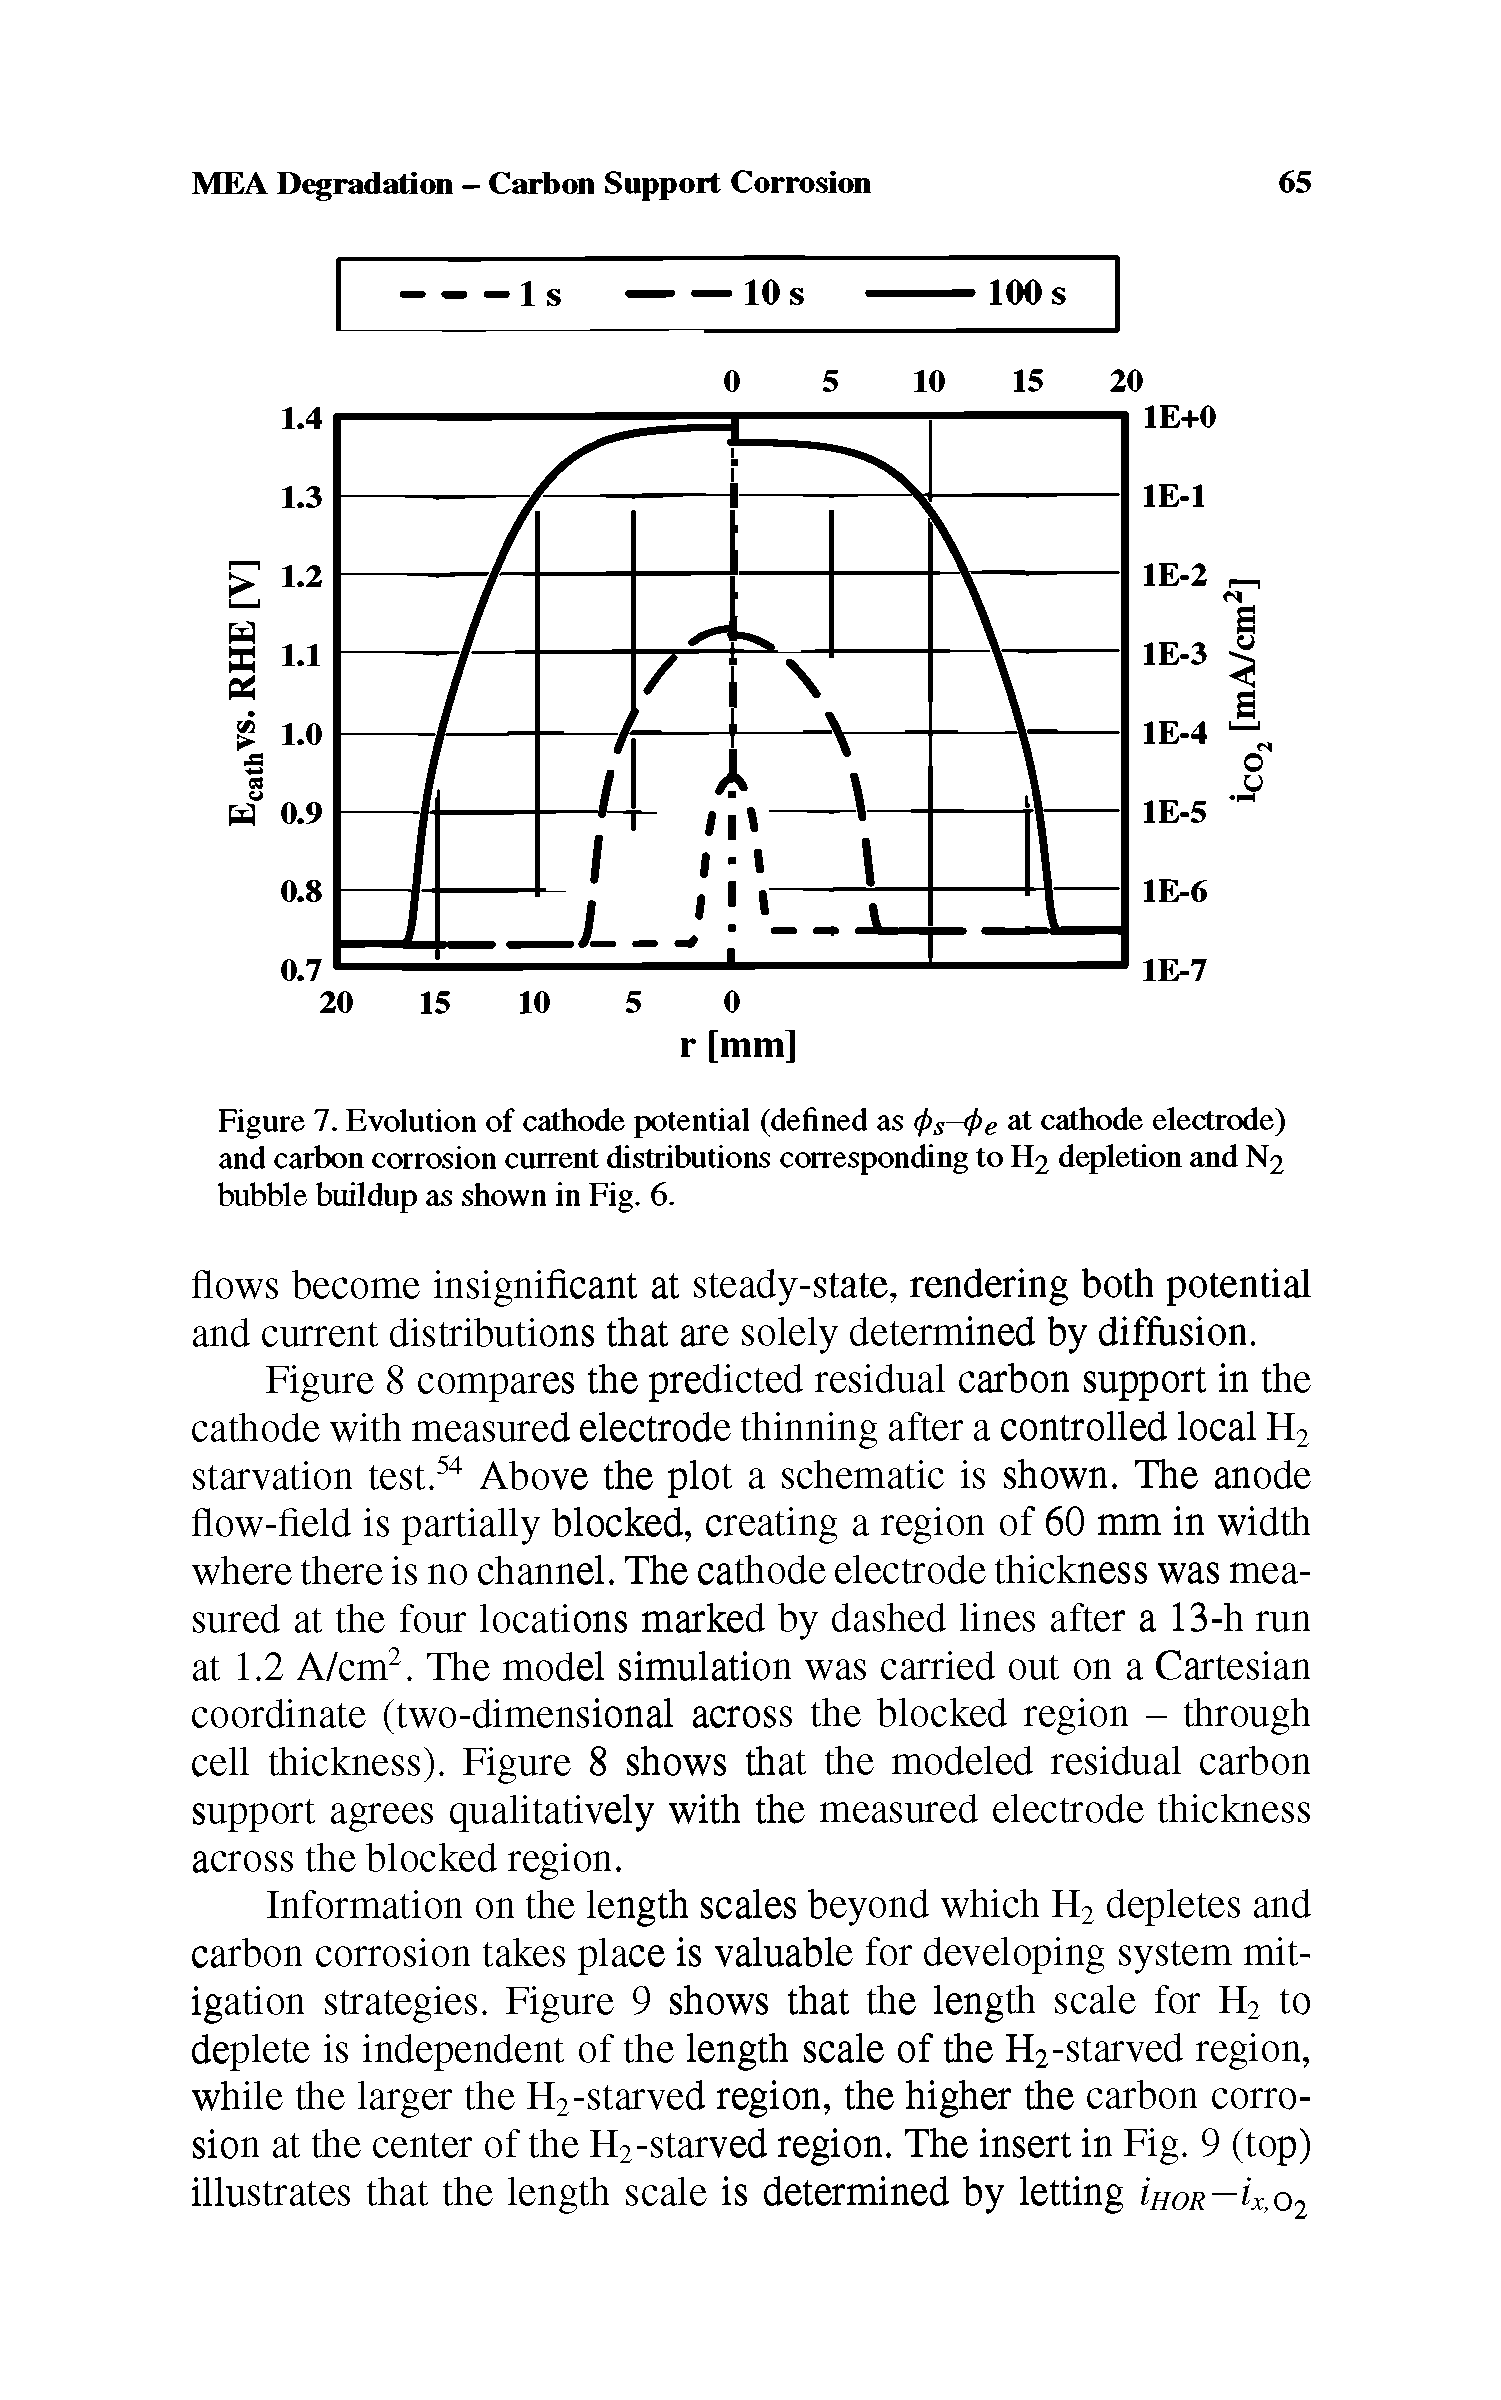 Figure 7. Evolution of cathode potential (defined as rj>s 4>e at cathode electrode) and carbon corrosion current distributions corresponding to H2 depletion and N2 bubble buildup as shown in Fig. 6.